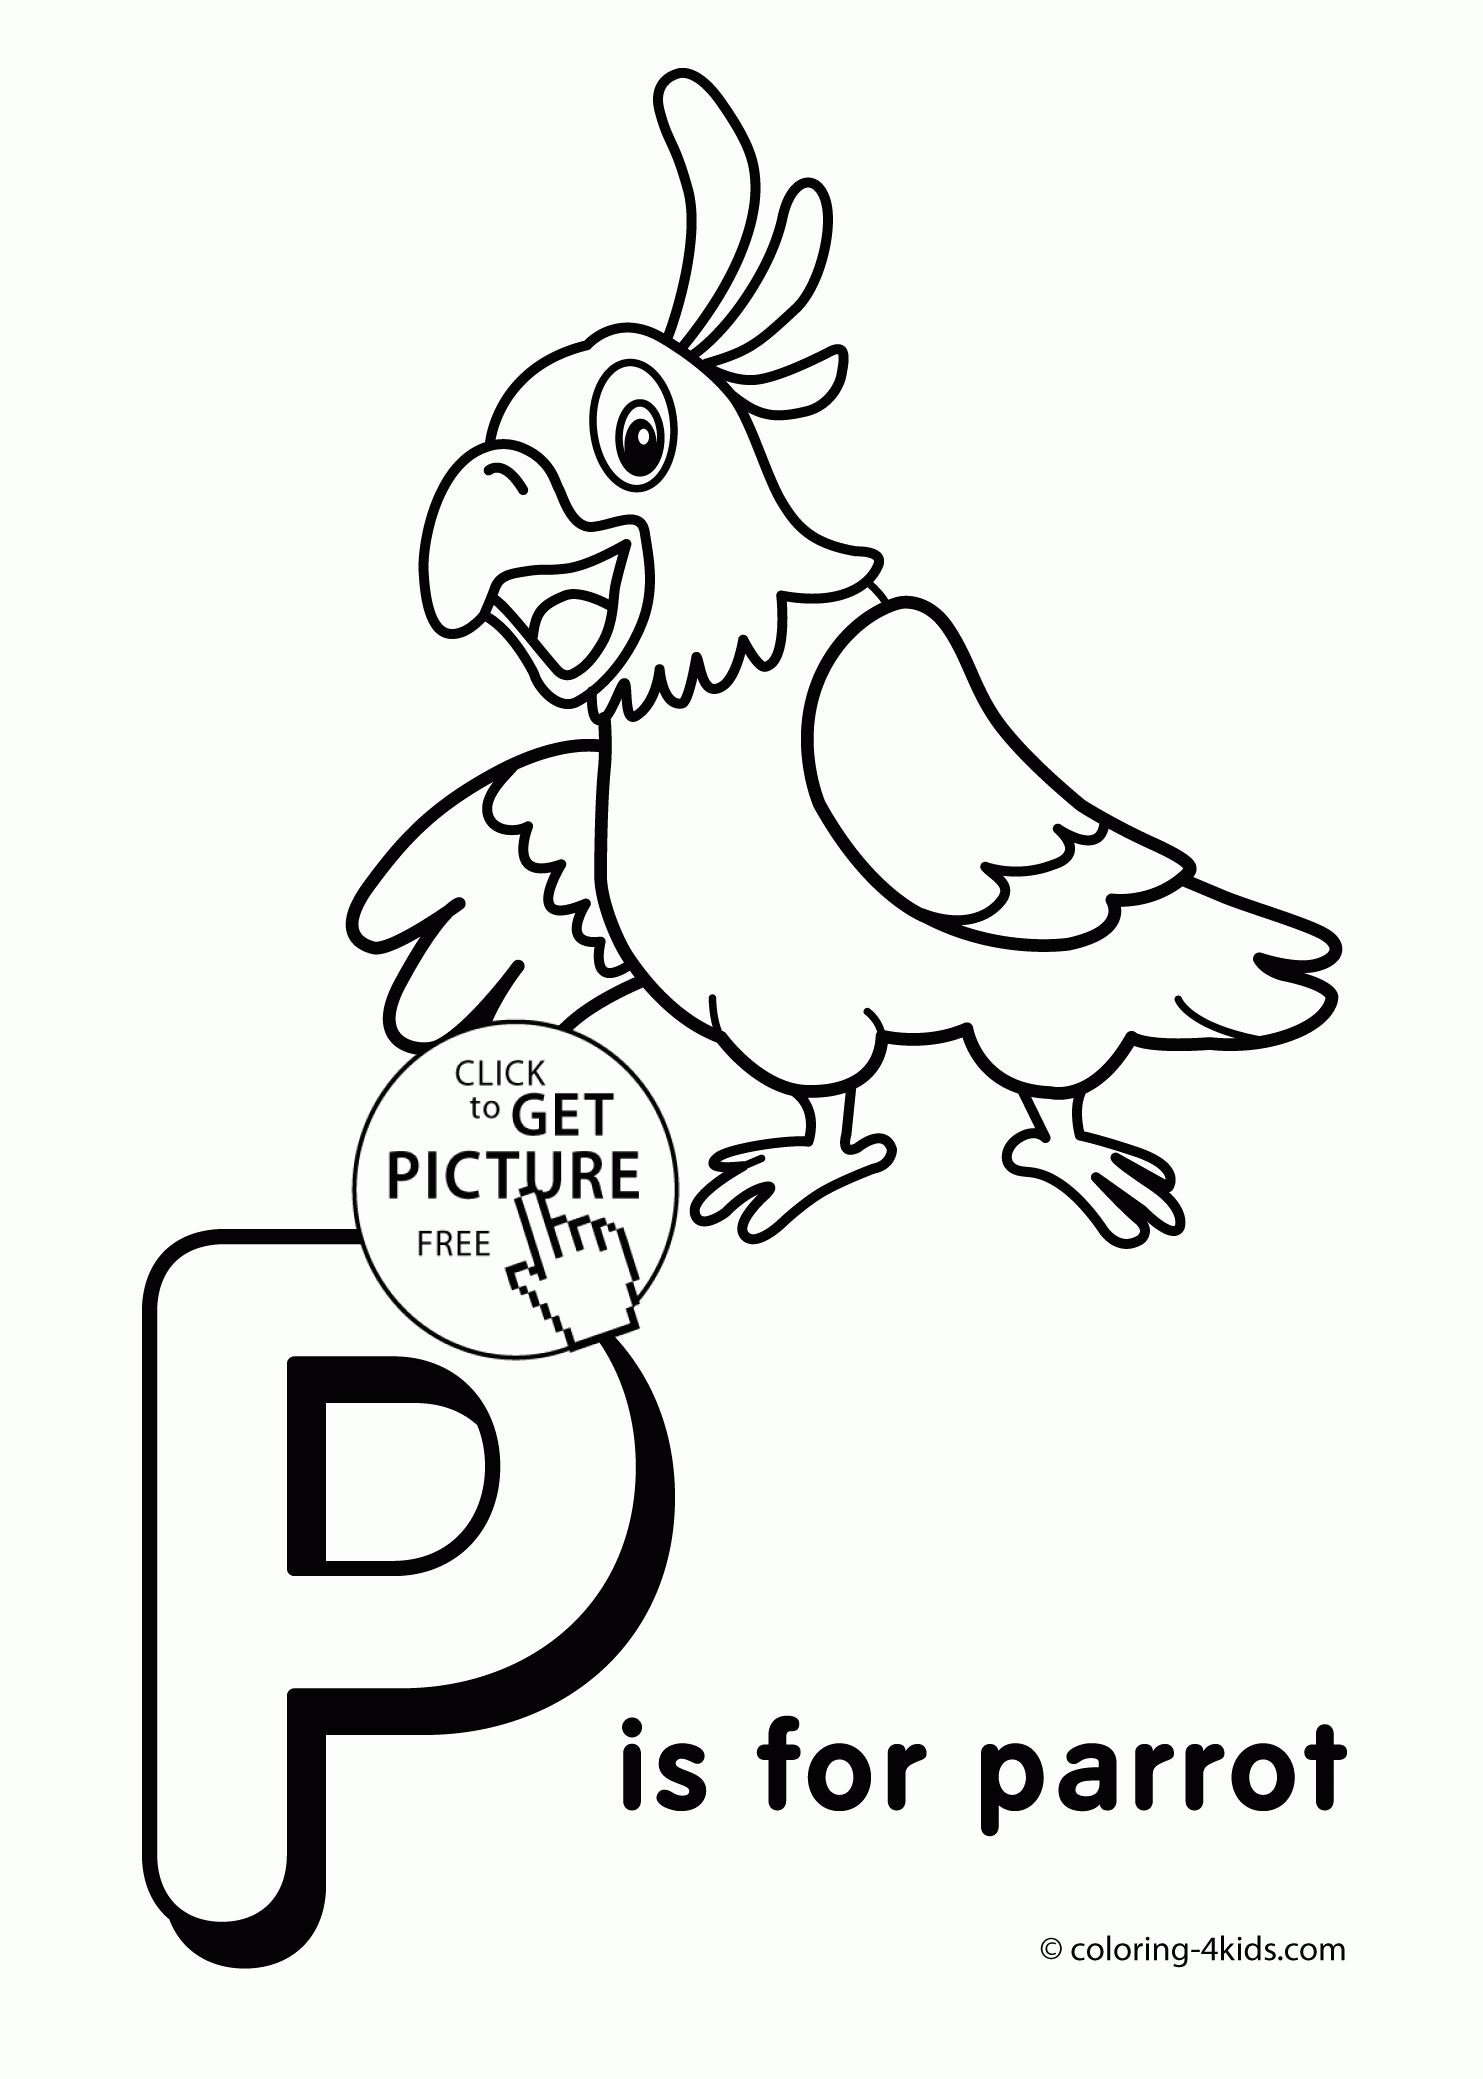 Letter P Coloring Pages Of Alphabet (P Letter Words) For Kids - Free Printable Preschool Alphabet Coloring Pages